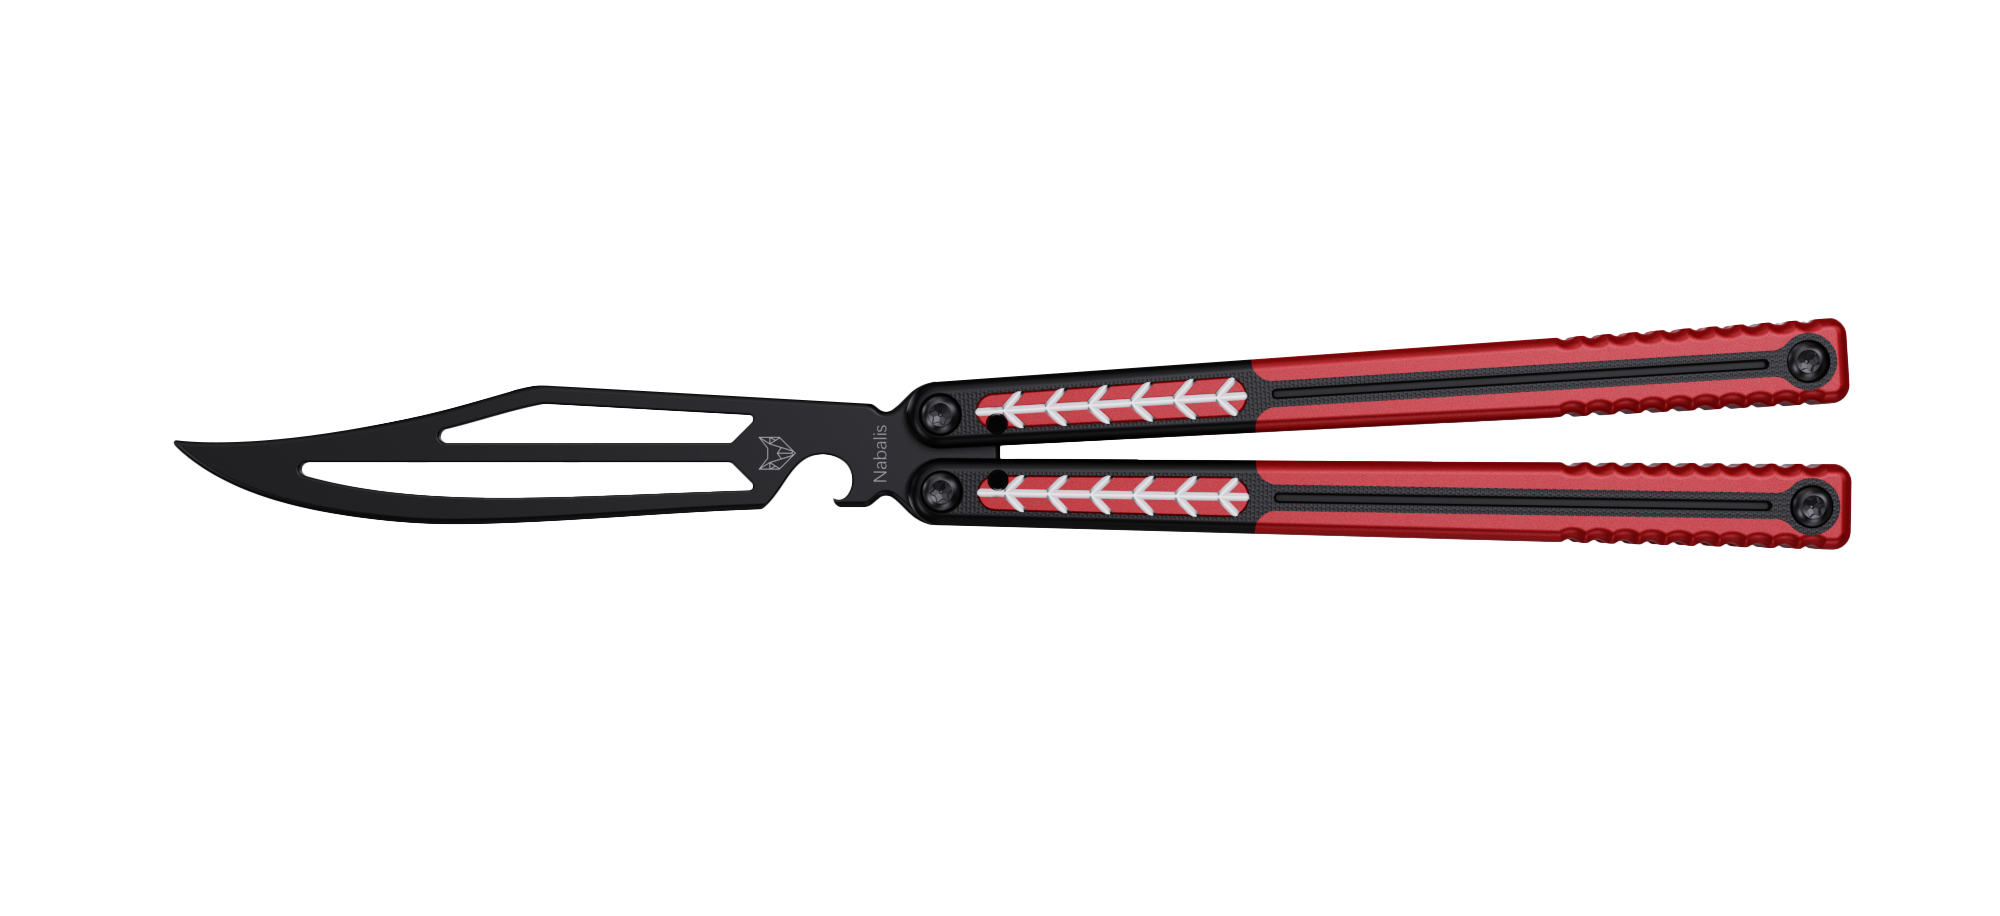 Nabalis Vulp Pro balisong training butterfly knife-Red